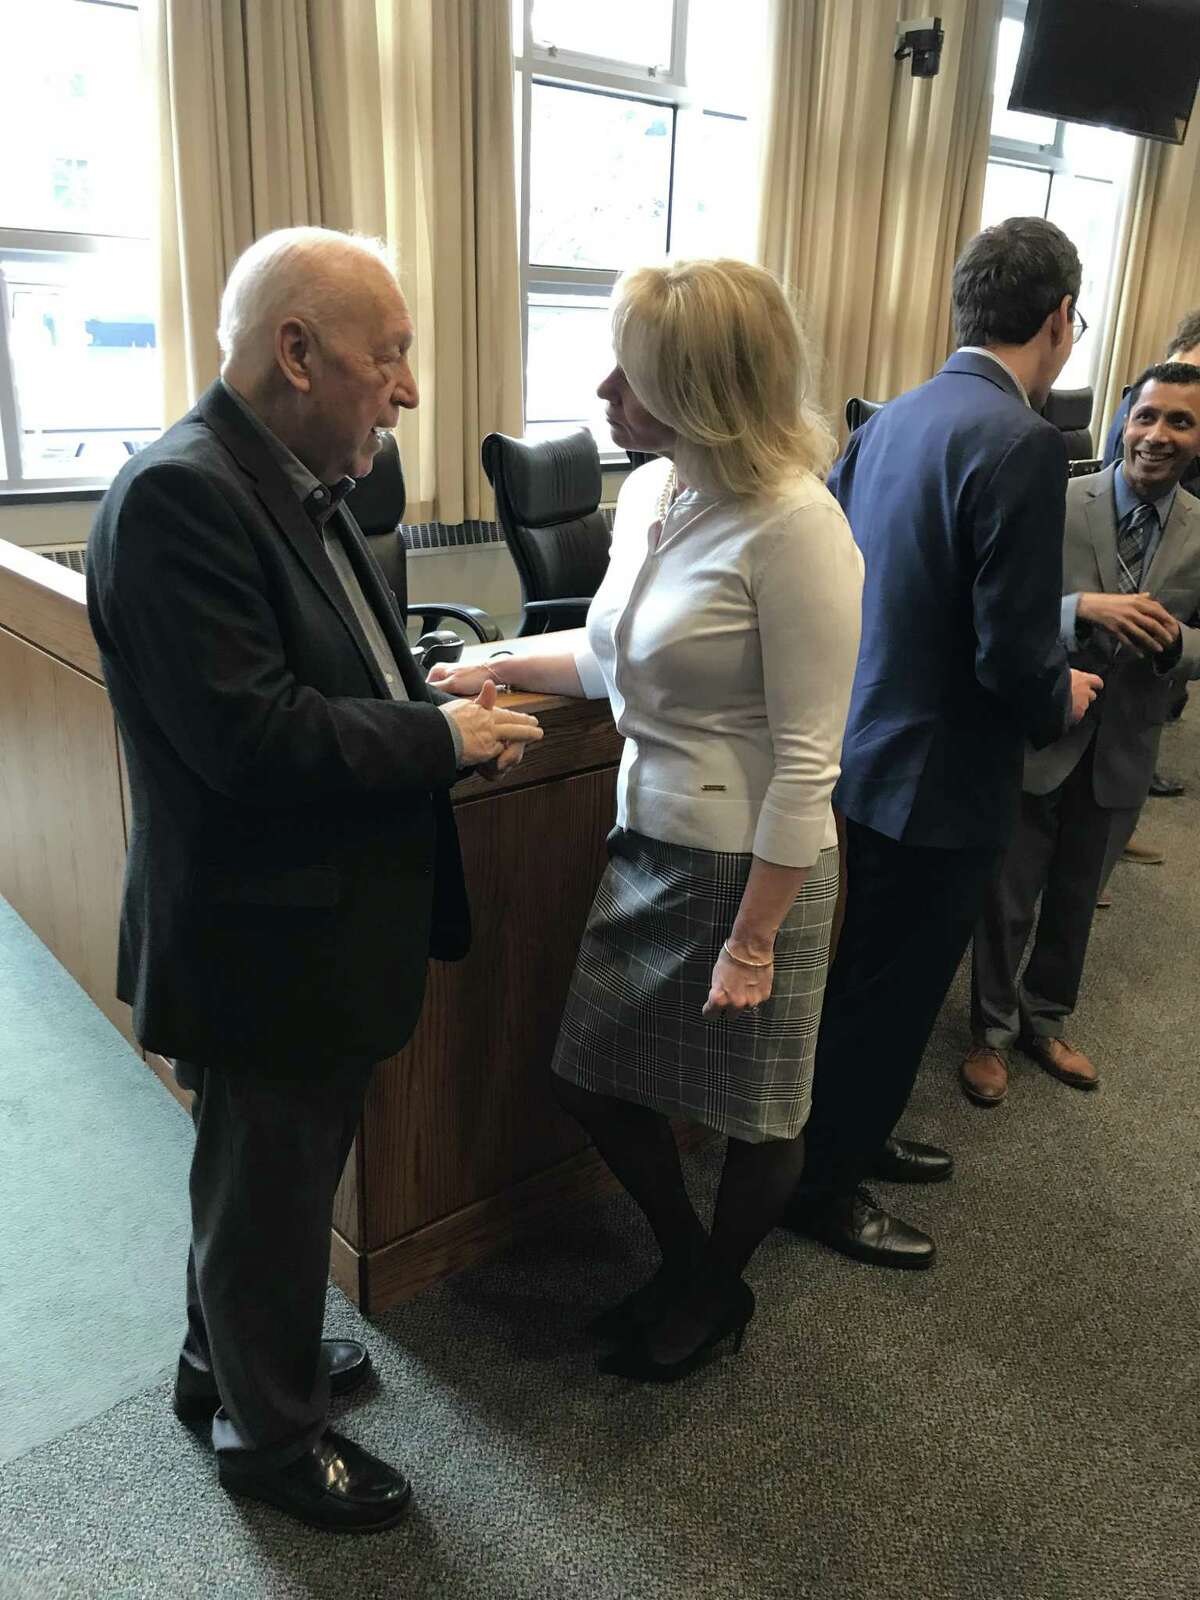 Lt. Gov. Susan Bysiewicz joined Congresswoman Rosa DeLauro, Congressman John Larson, Middletown Deputy Mayor Bob Santangelo, Councilwoman Mary Bartolotta, and other members of the Middletown community on Friday, March 15, 2019, to highlight the importance of a complete count for the 2020 U.S. Census.